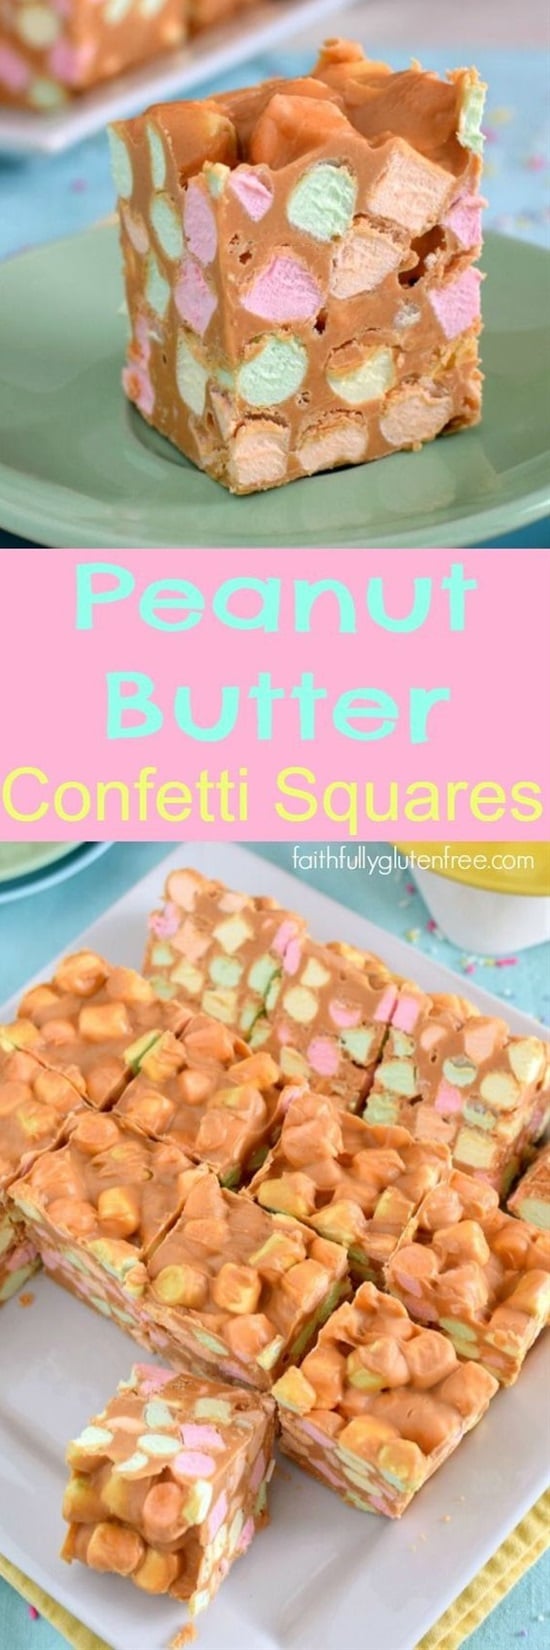 15 Things You Can Do With Peanut Butter - Peanut Butter recipes, Peanut Butter desserts, peanut butter, Desserts with Peanut Butter